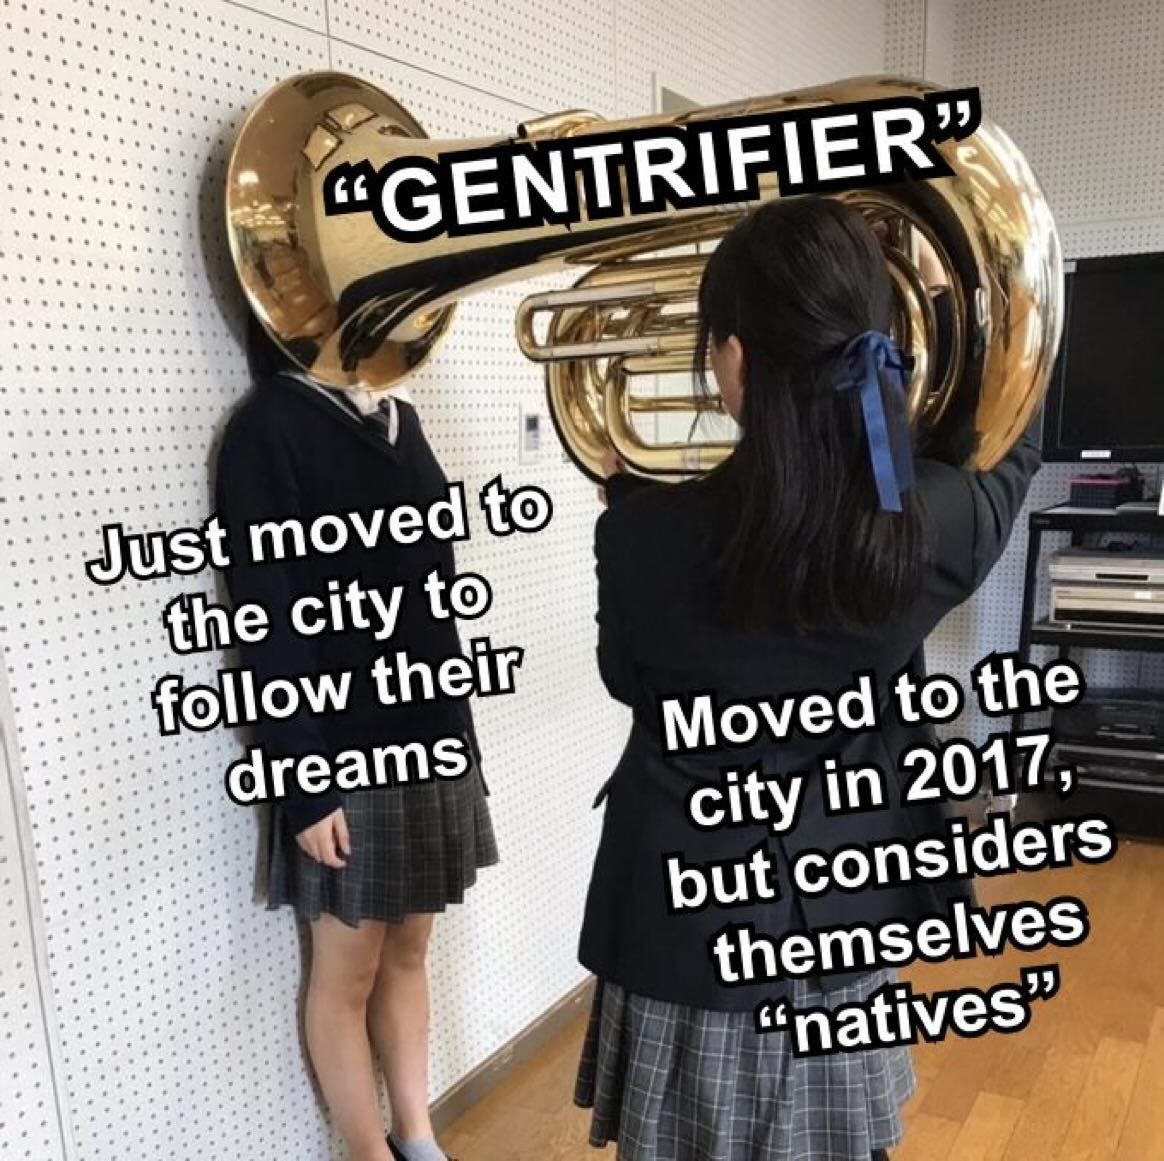 Photo by YIMBYLAND on October 02, 2023. May be a meme of 2 people, trumpet, clarinet, horn and text that says '"GENTRIFIER" Just moved to the city to follow their dreams Moved to the city in 2017, but considers themselves "natives"'.